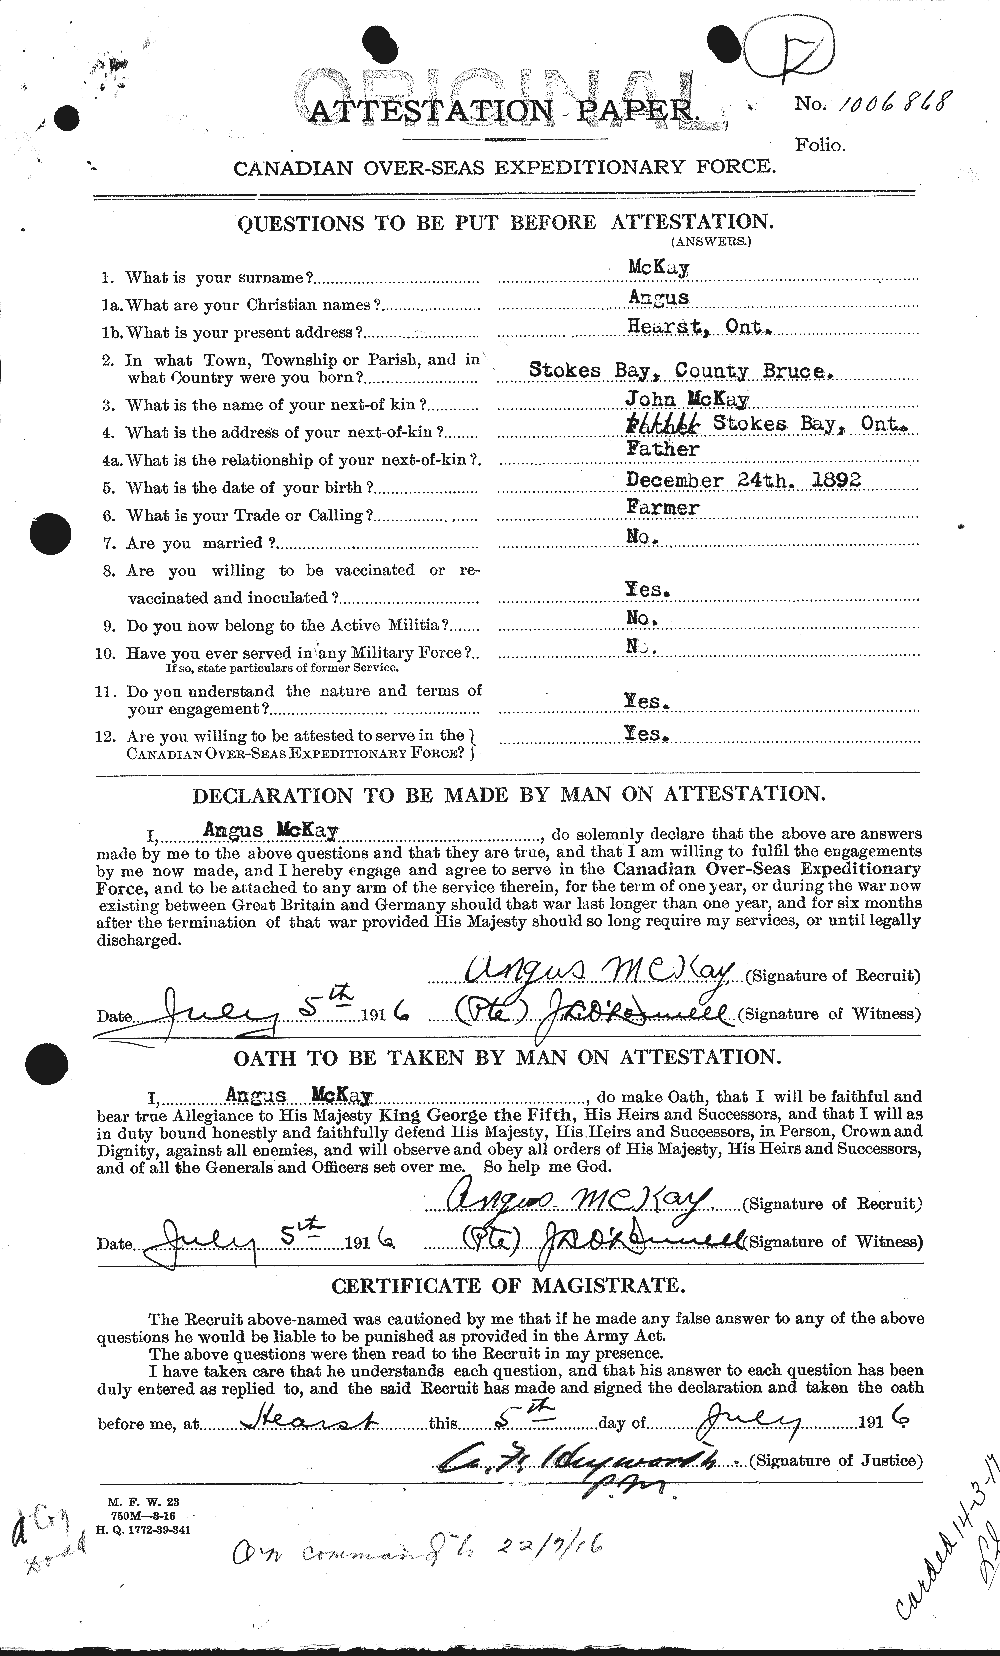 Personnel Records of the First World War - CEF 530990a